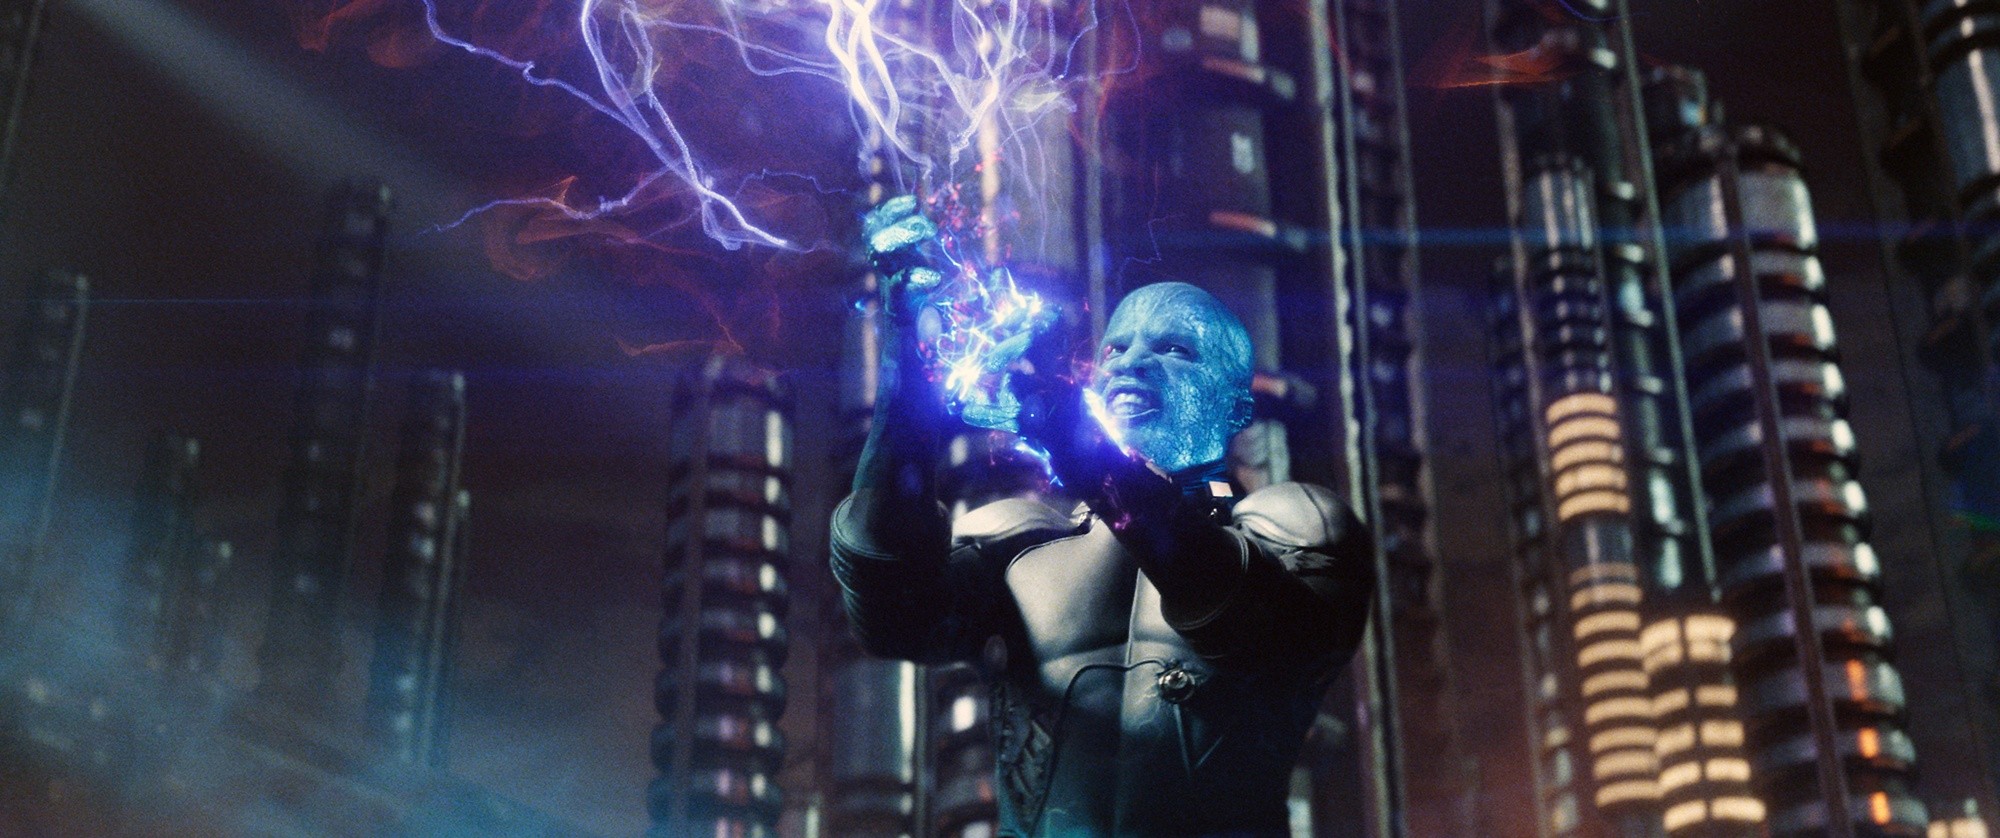 Jamie Foxx stars as Max Dillon/Electro in Columbia Pictures' The Amazing Spider-Man 2 (2014)